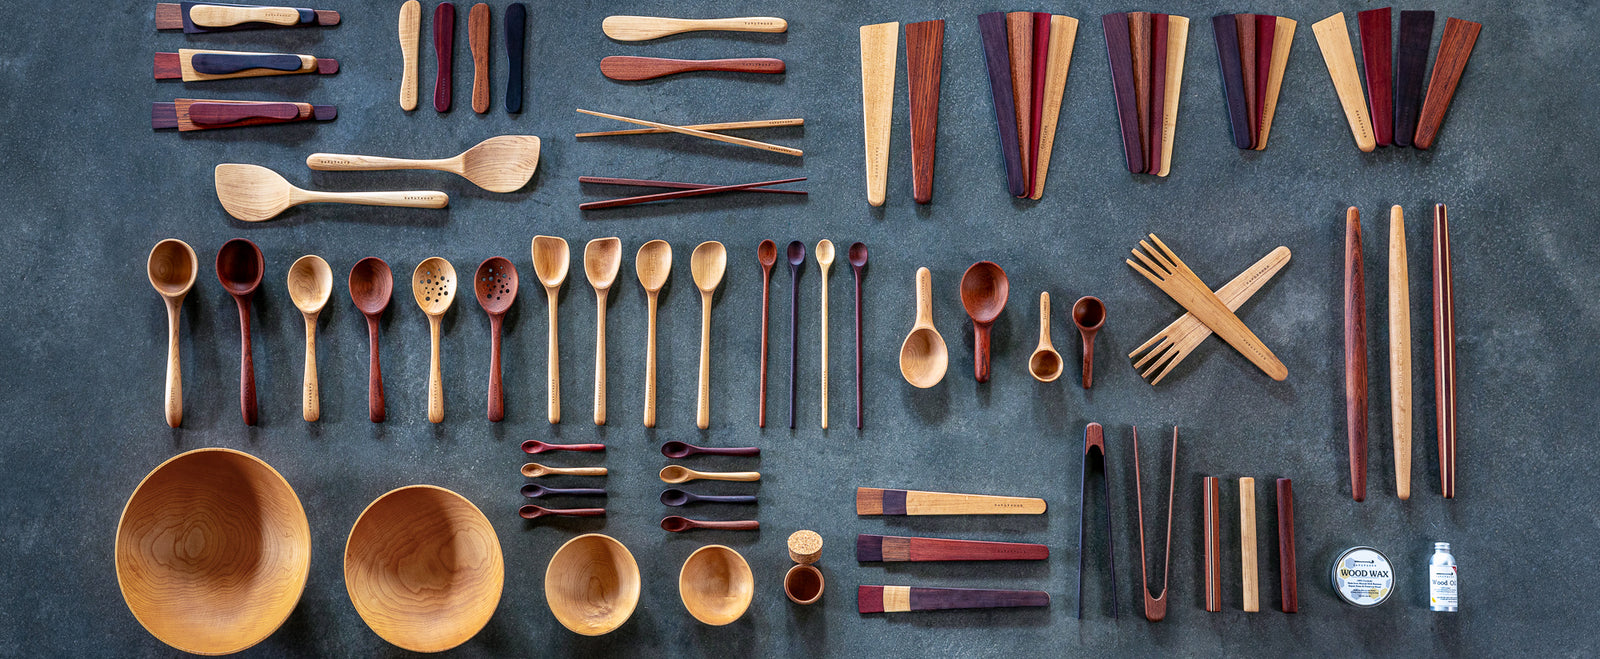 High-quality and functional crafted kitchen products